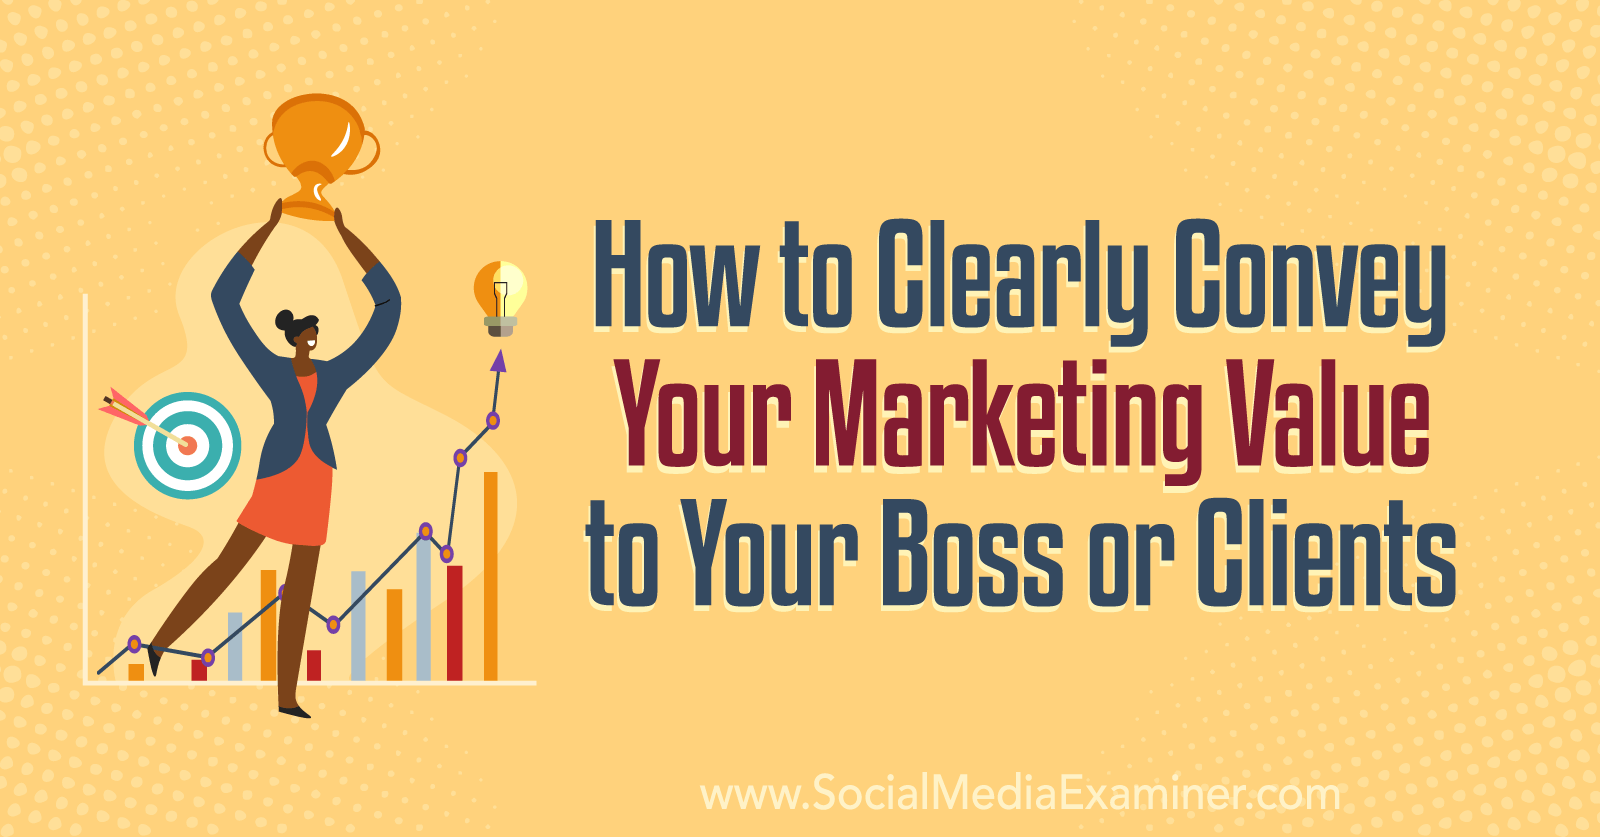 How to Clearly Convey Your Marketing Value to Your Boss or Clients by Social Media Examiner